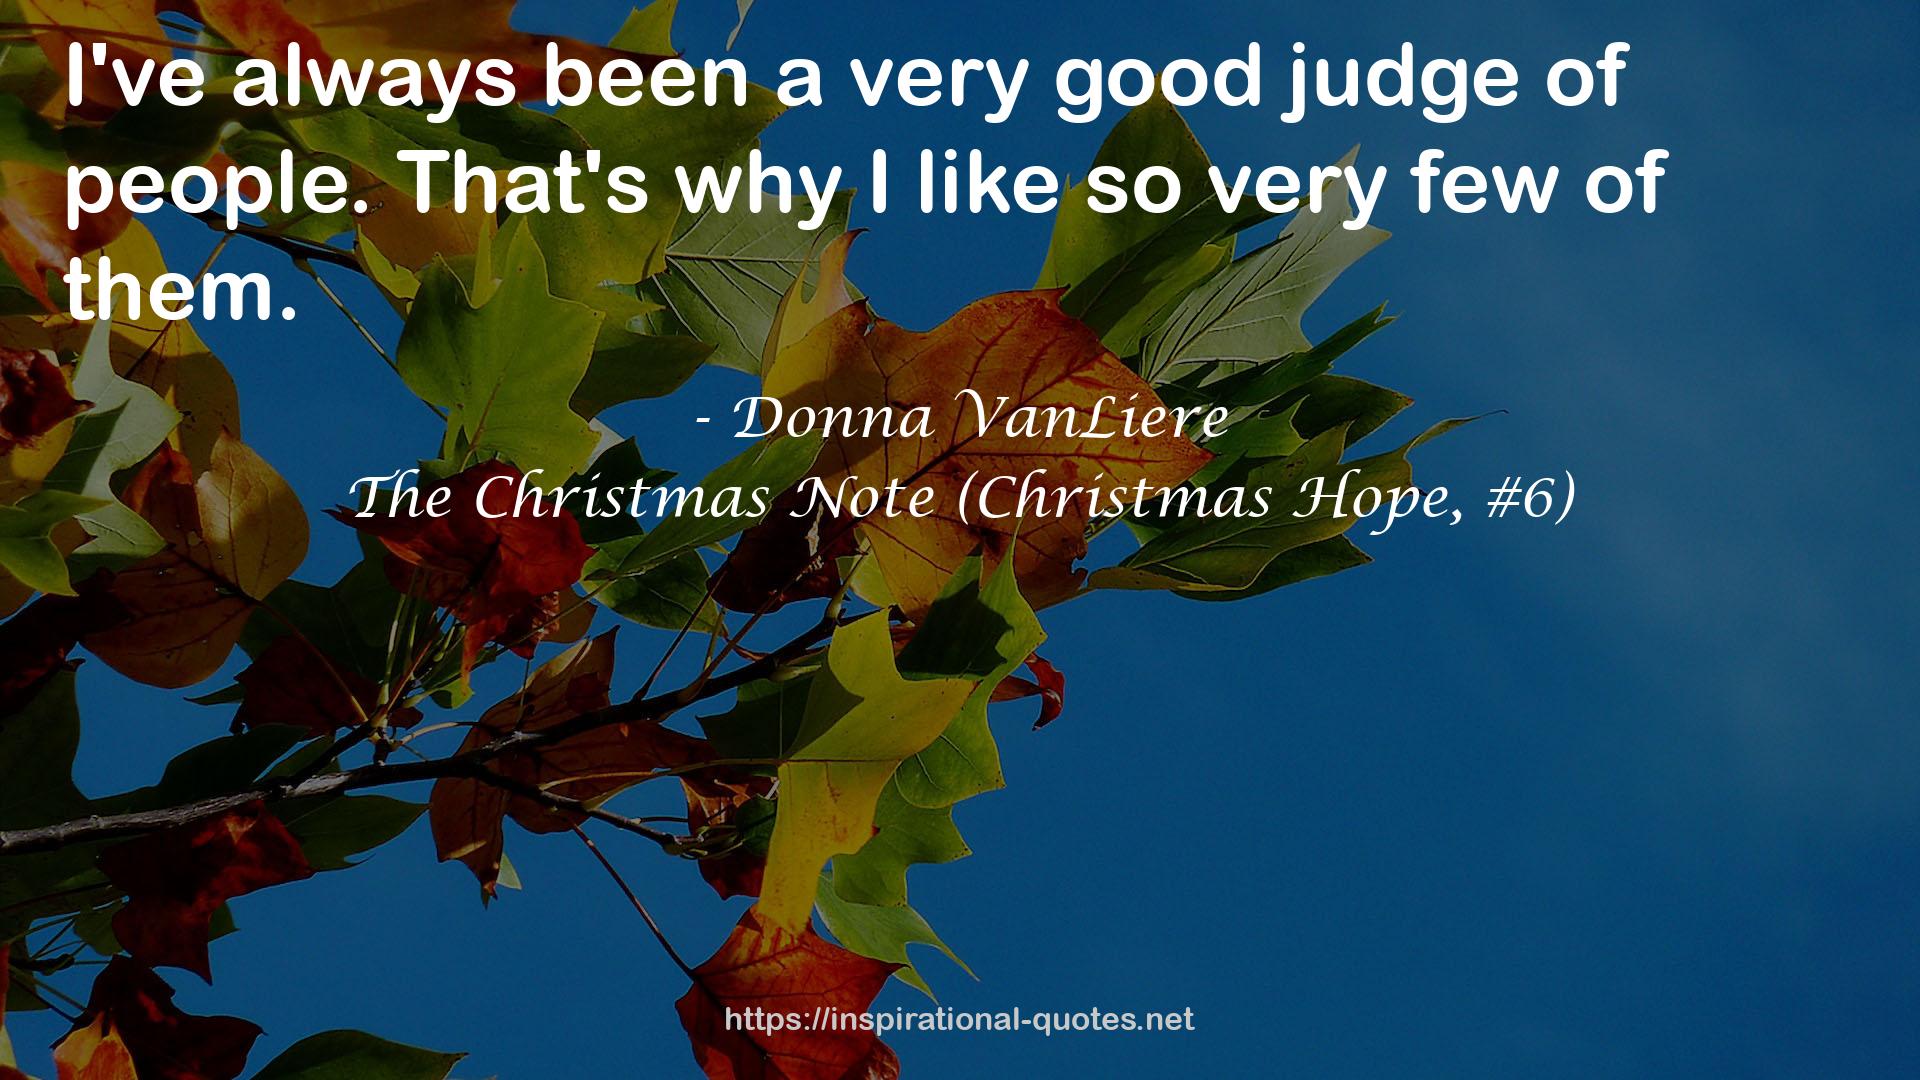 The Christmas Note (Christmas Hope, #6) QUOTES